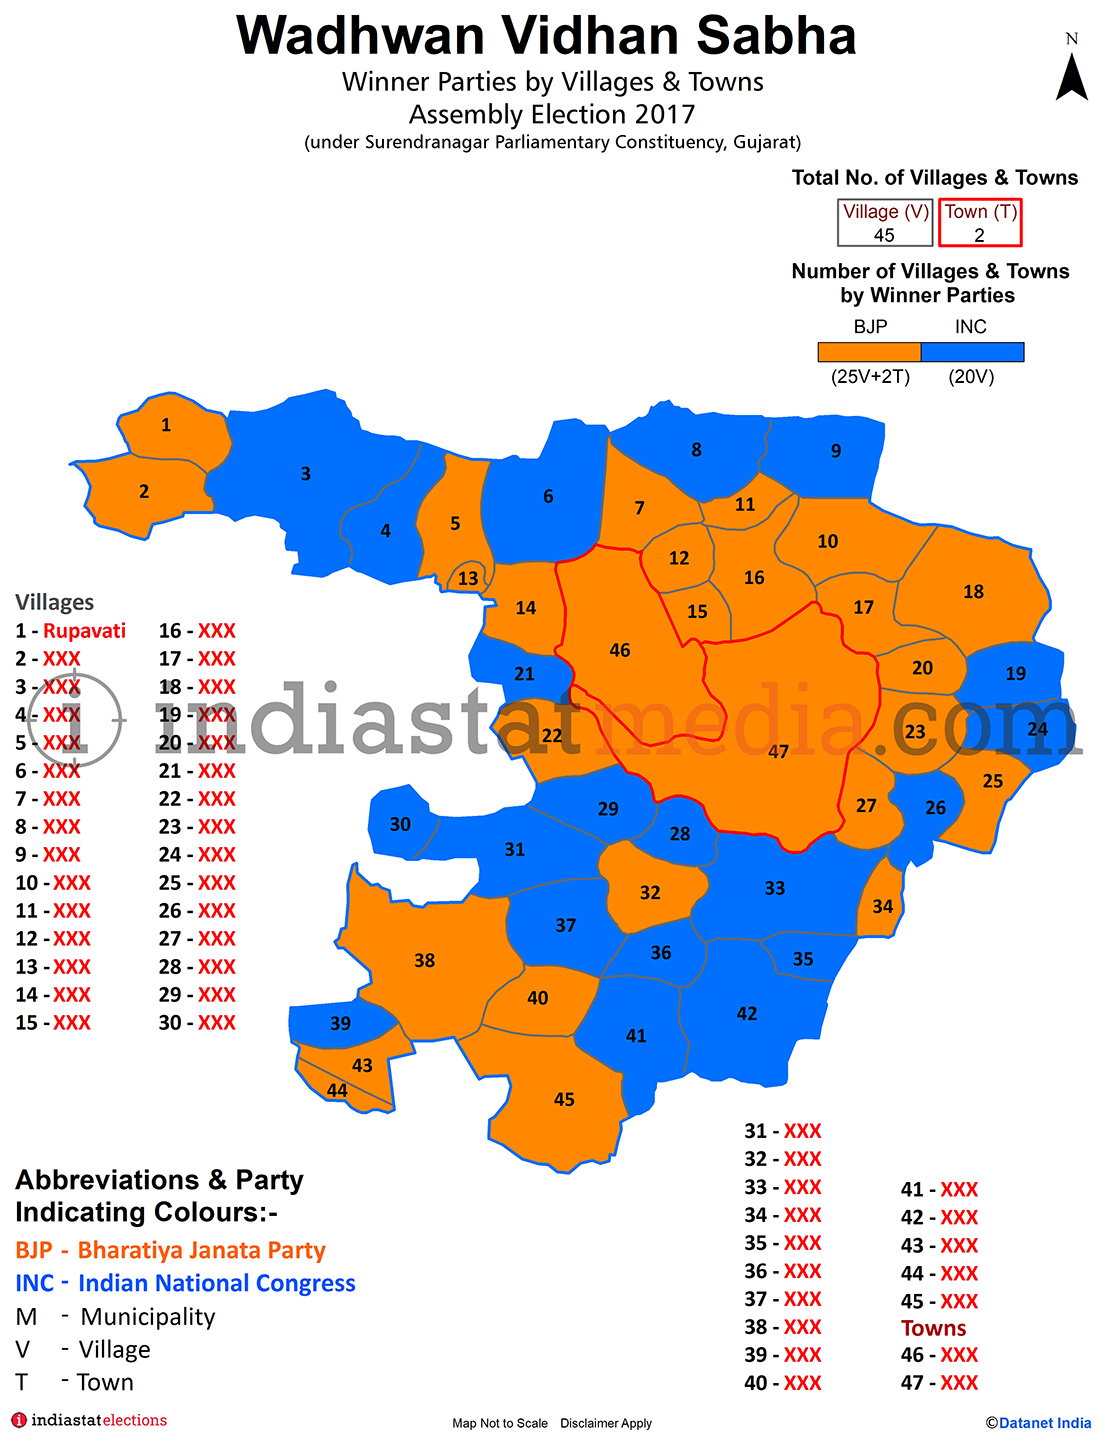 Winner Parties by Villages and Towns in Wadhwan Assembly Constituency under Surendranagar Parliamentary Constituency in Gujarat (Assembly Election - 2017)